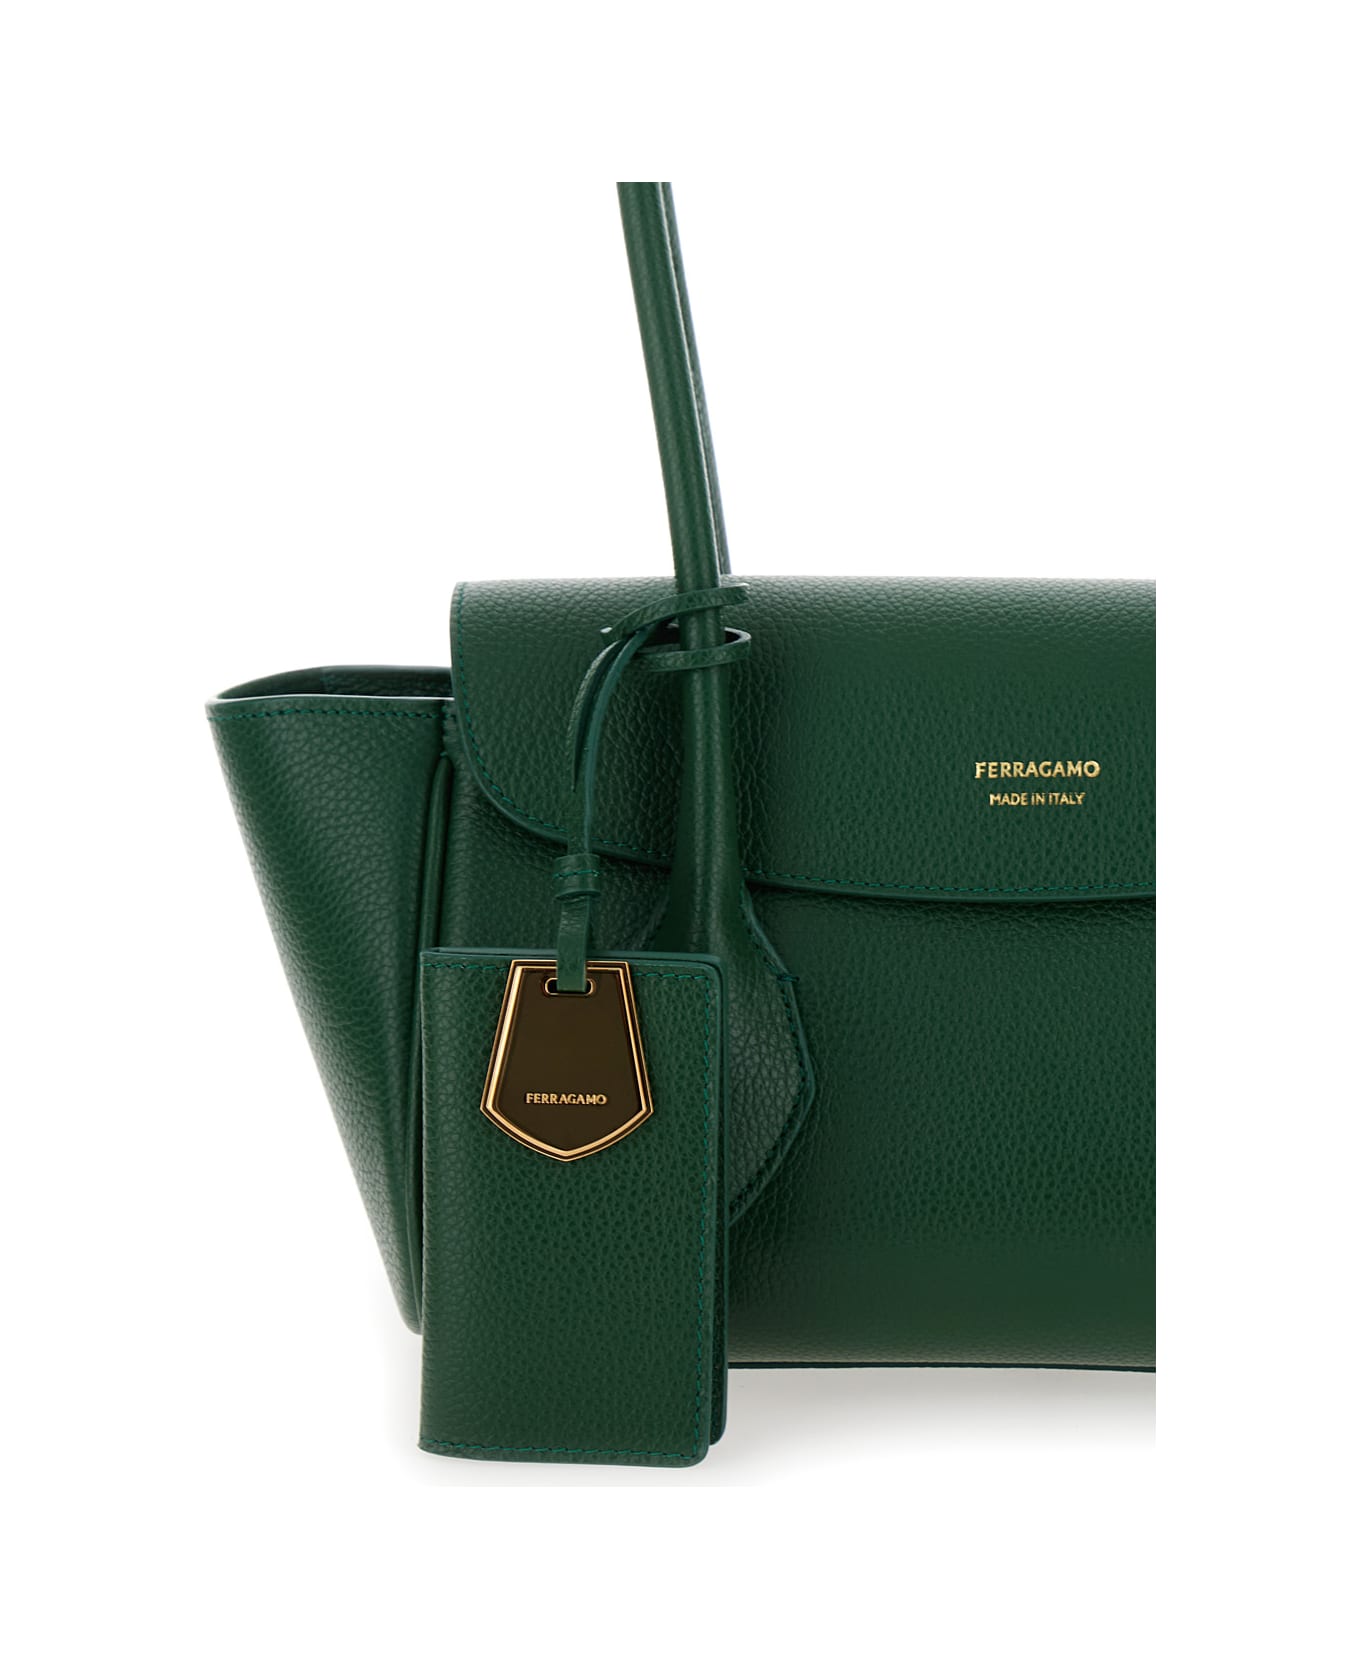 Ferragamo 'east-west S' Green Handbag With Logo Detail In Hammered Leather Woman - Green